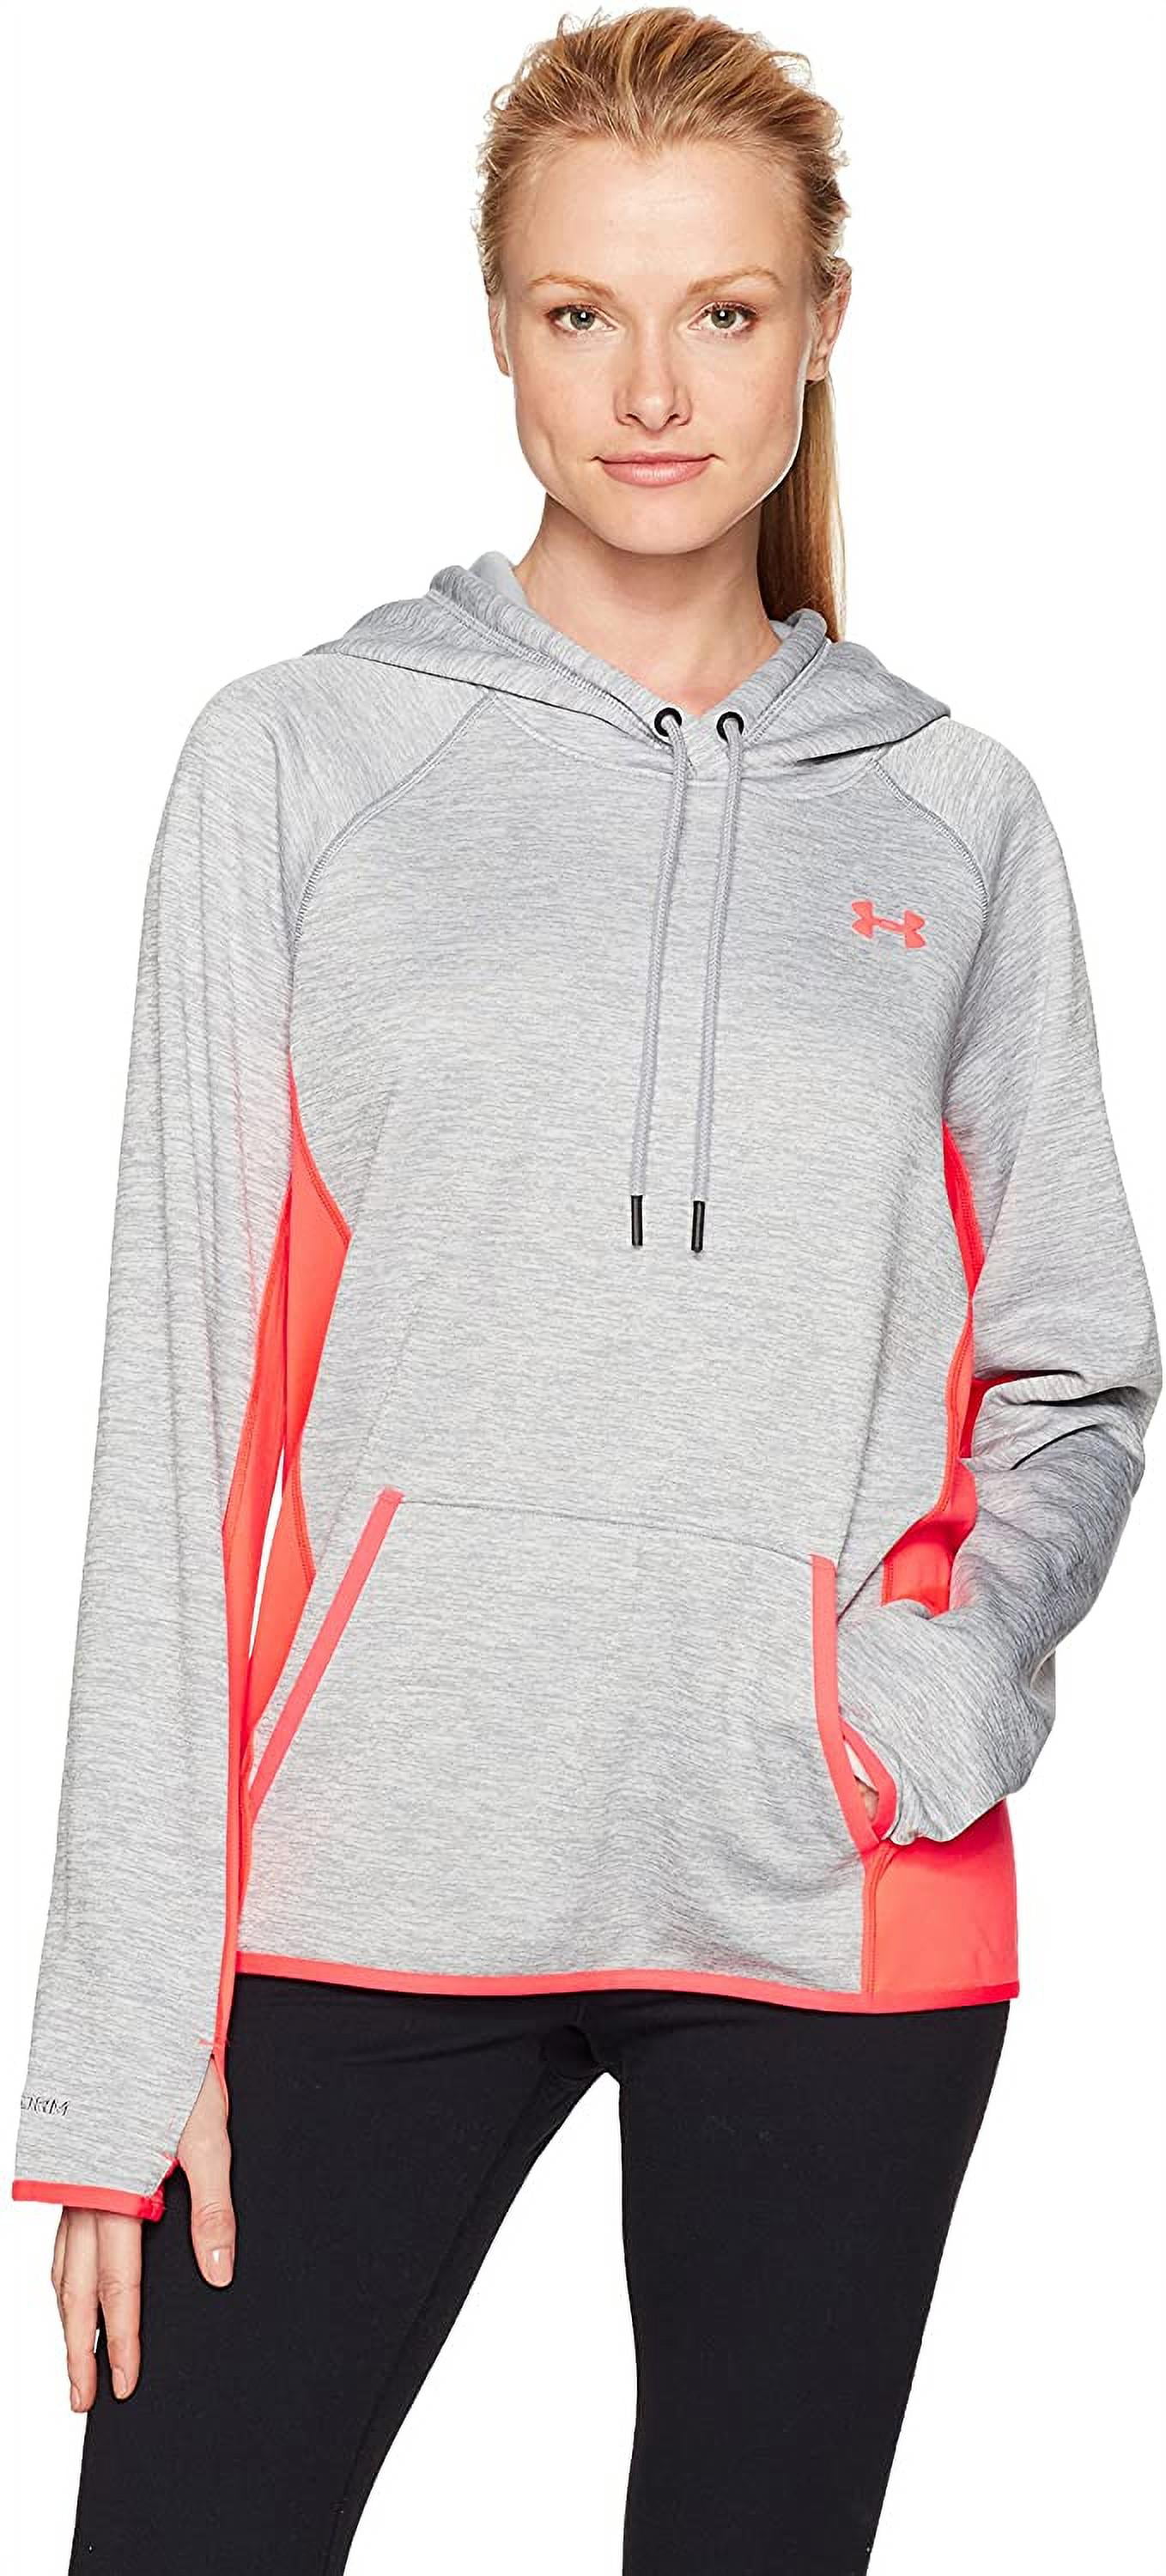 Under Armour Womens Storm Fleece Hoodie Black Sports Gym Breathable Lightweight 